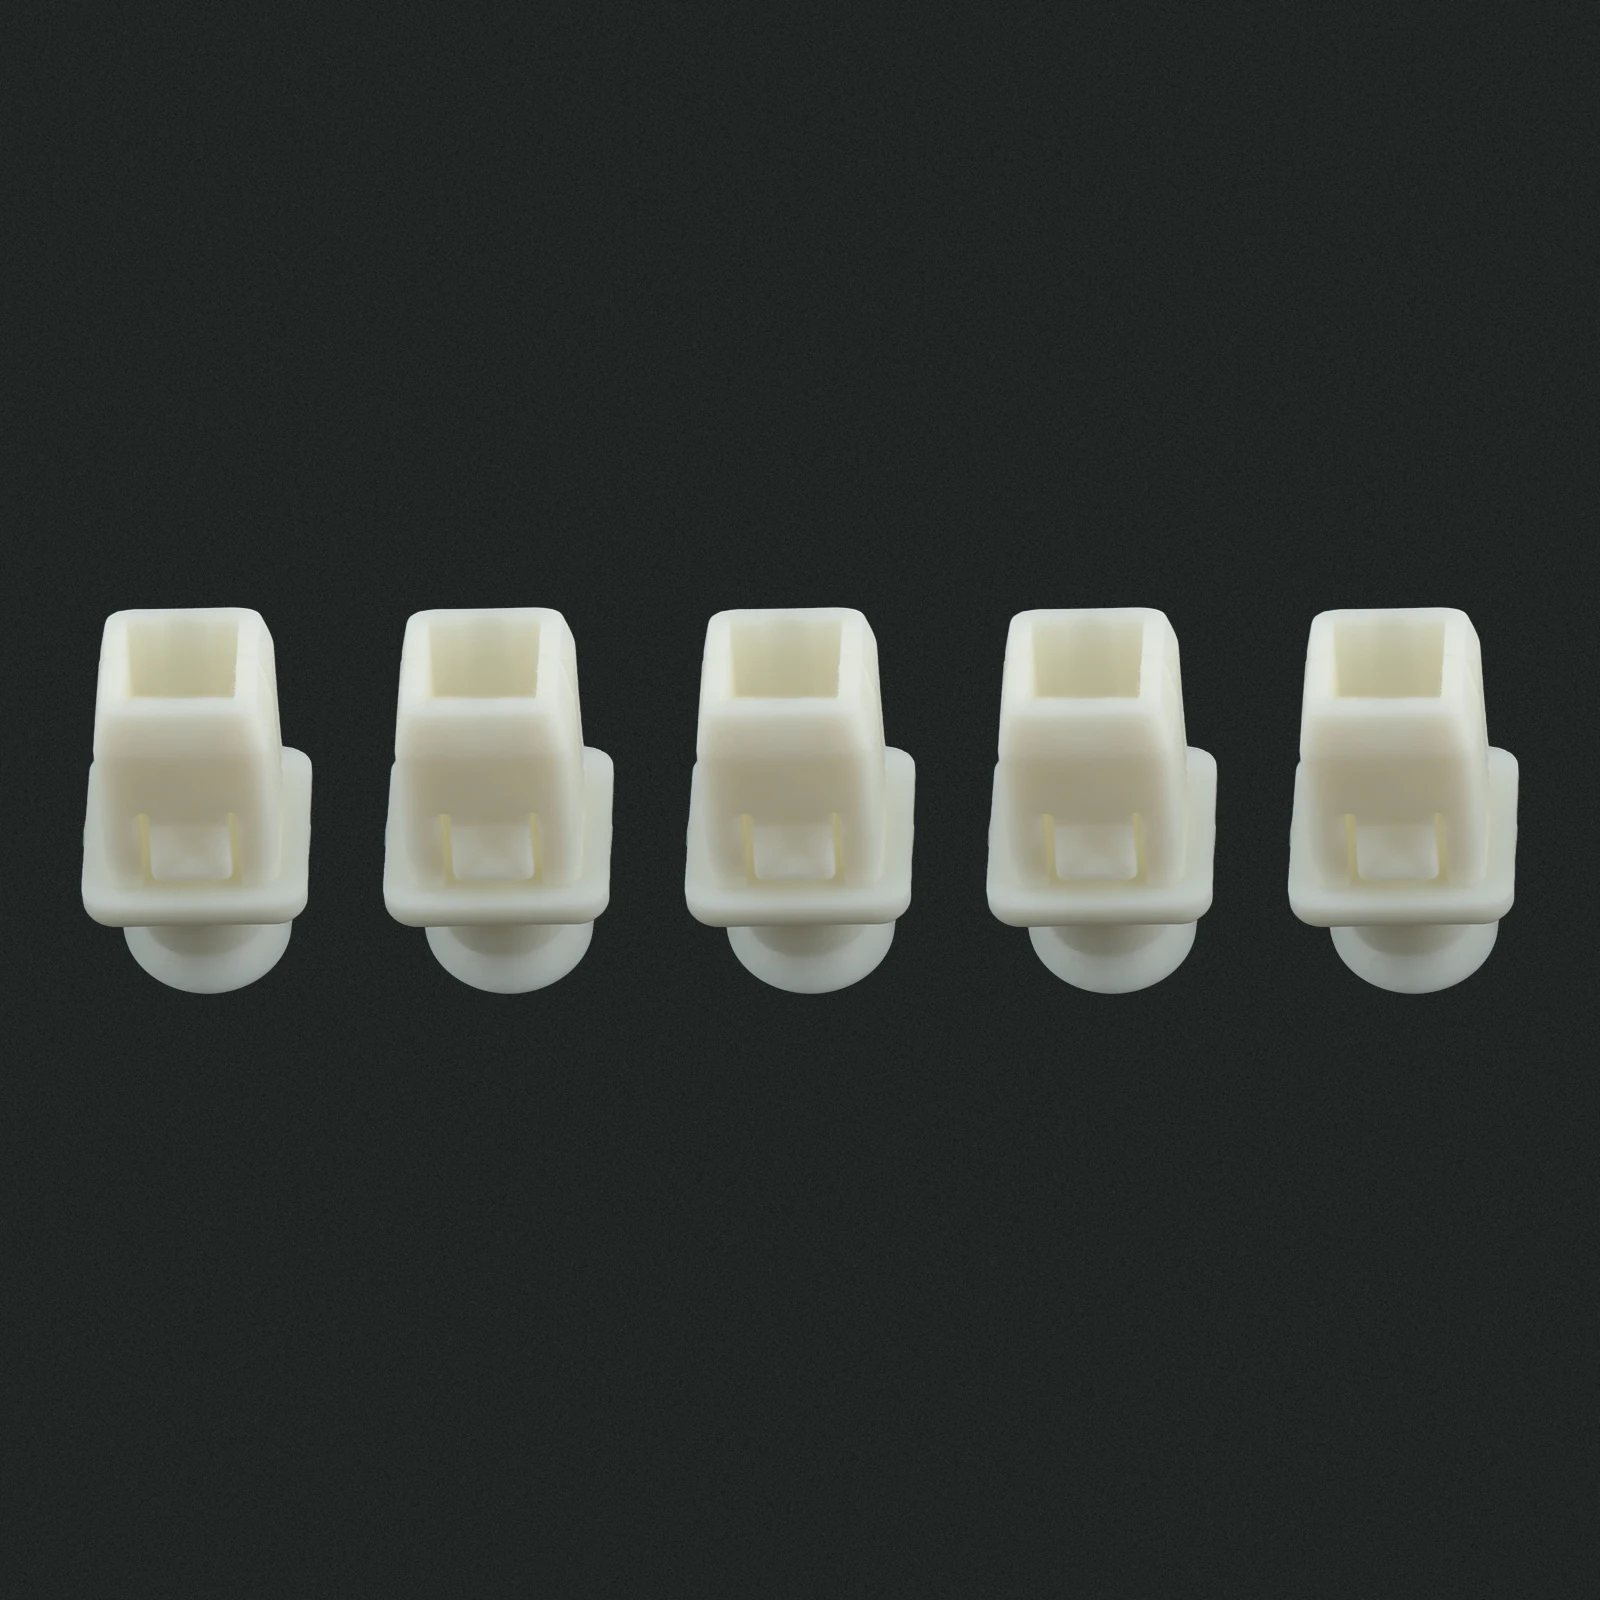 Car Headlight Adjusting Screw Nut Clips for Toyota Hilux Tacoma Pick-Up ... - $15.15